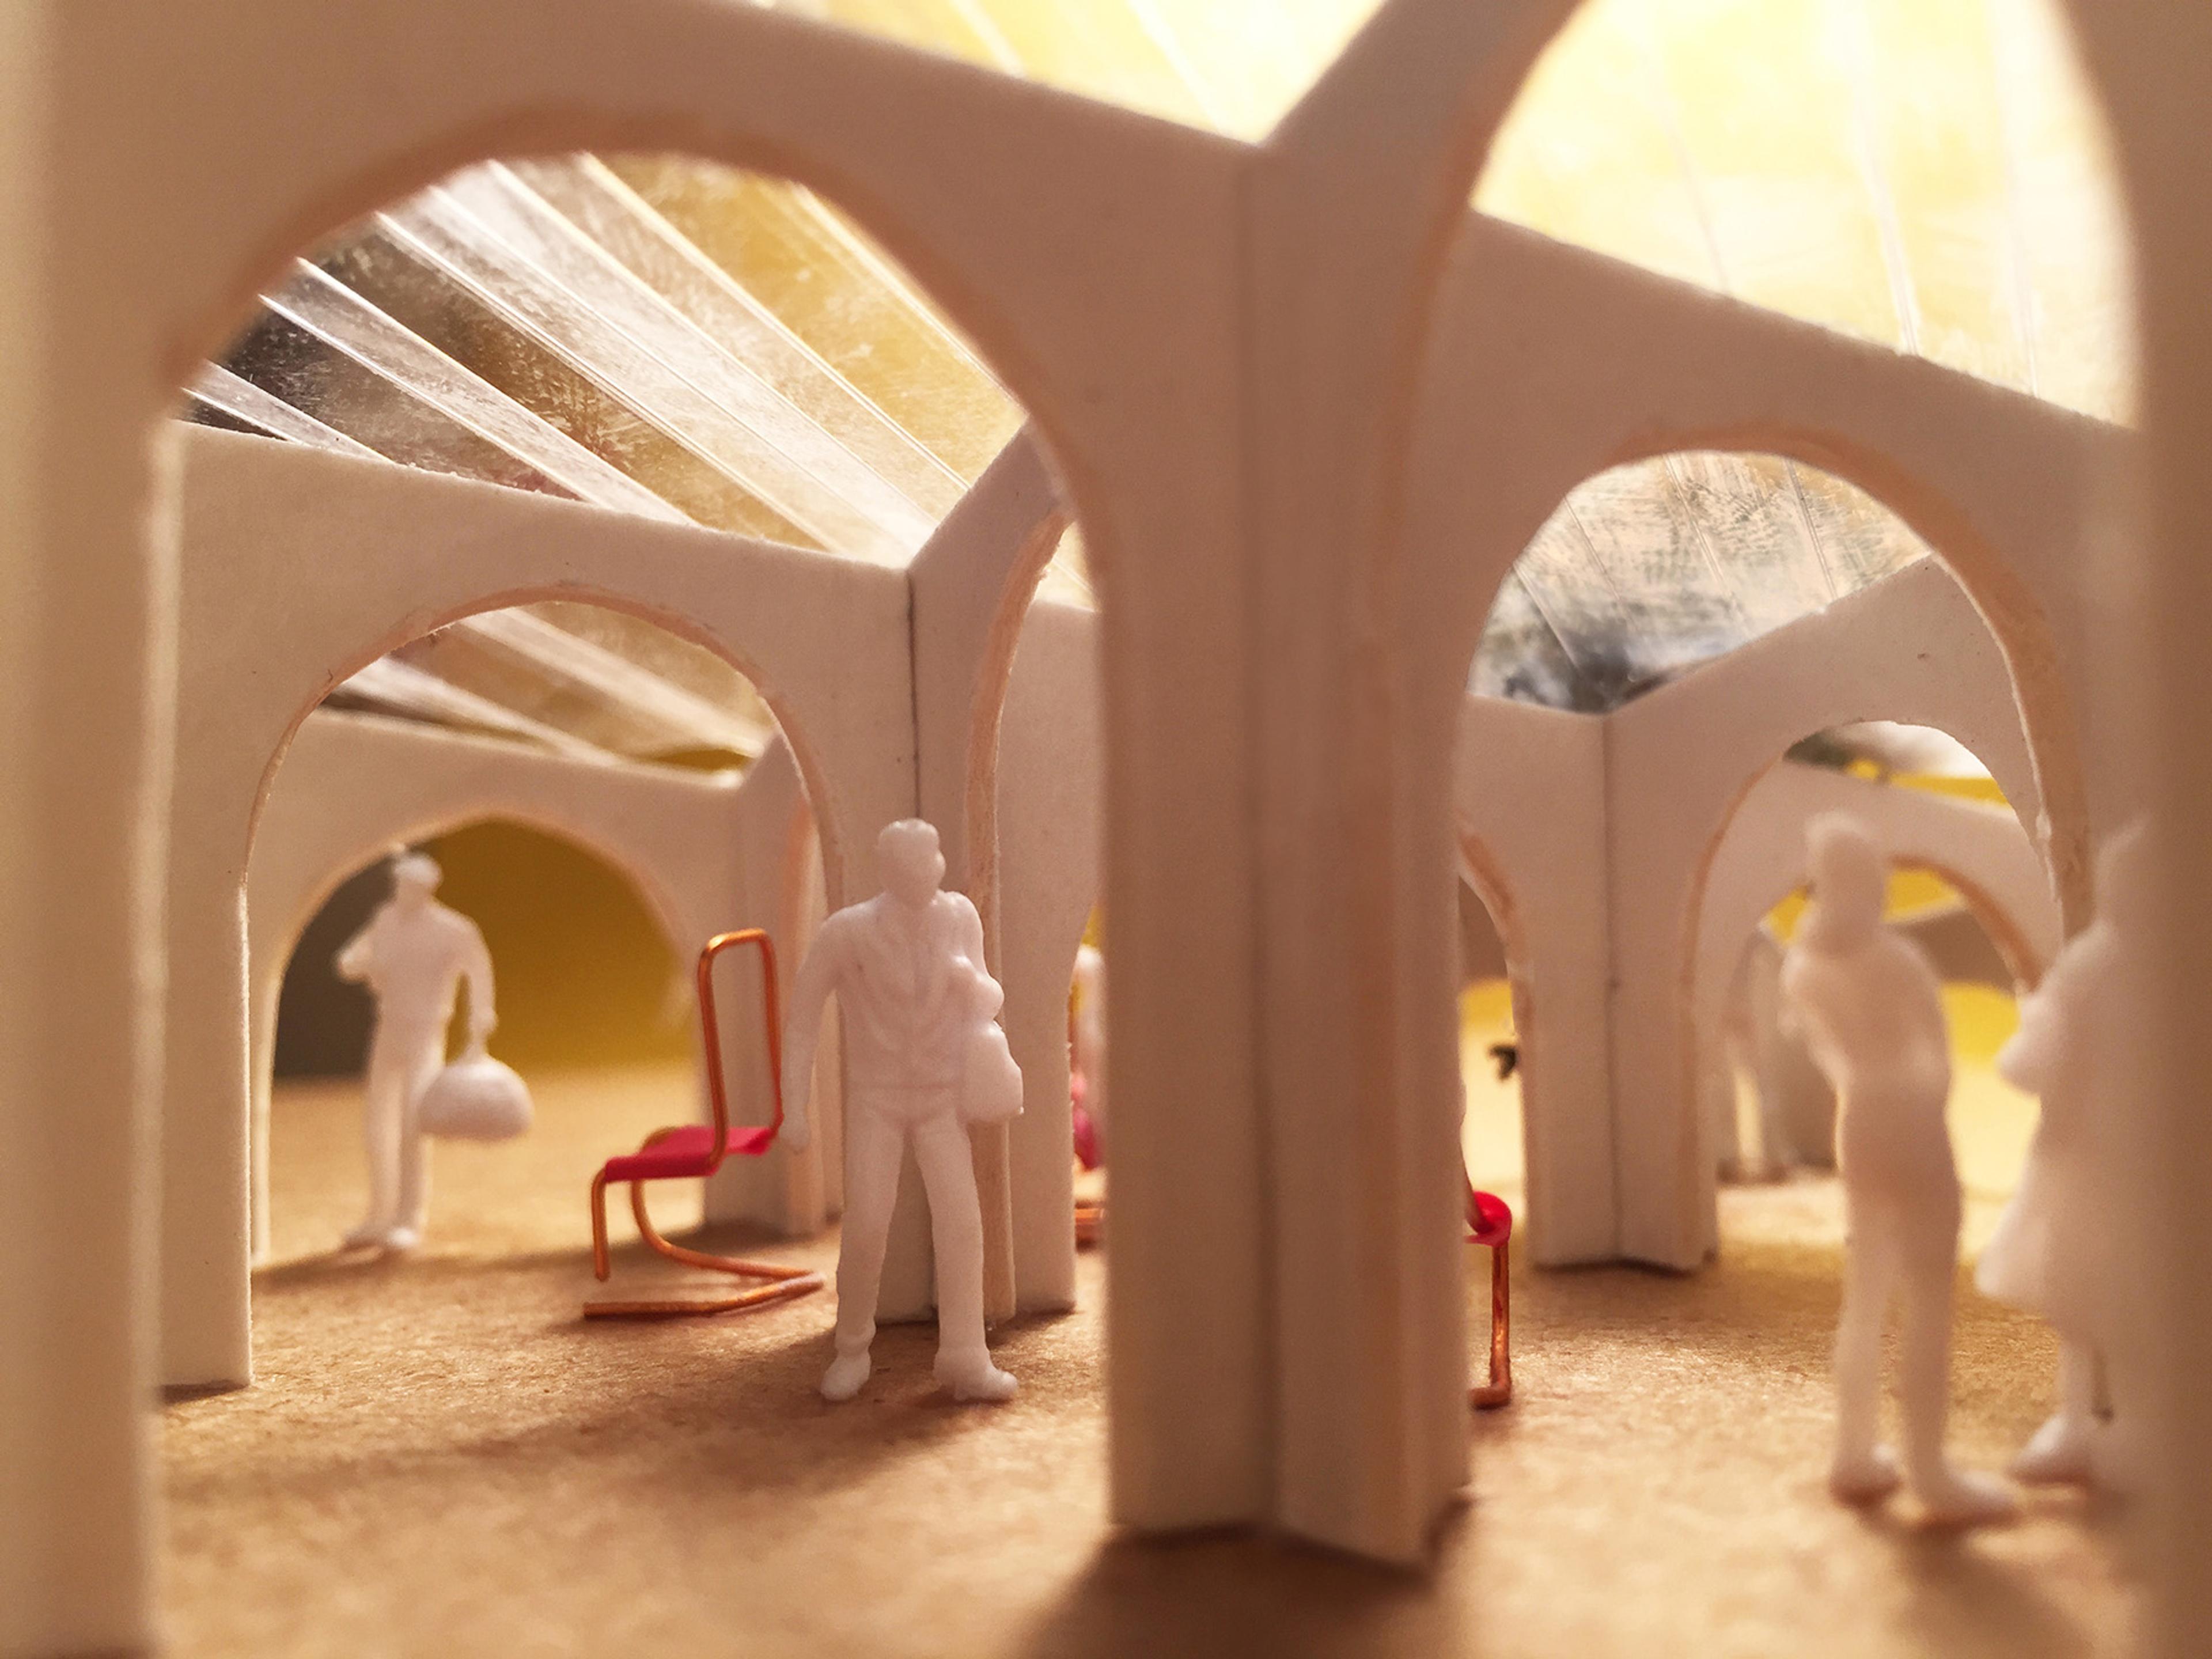 Inside architectural model of pavilion with chairs and people